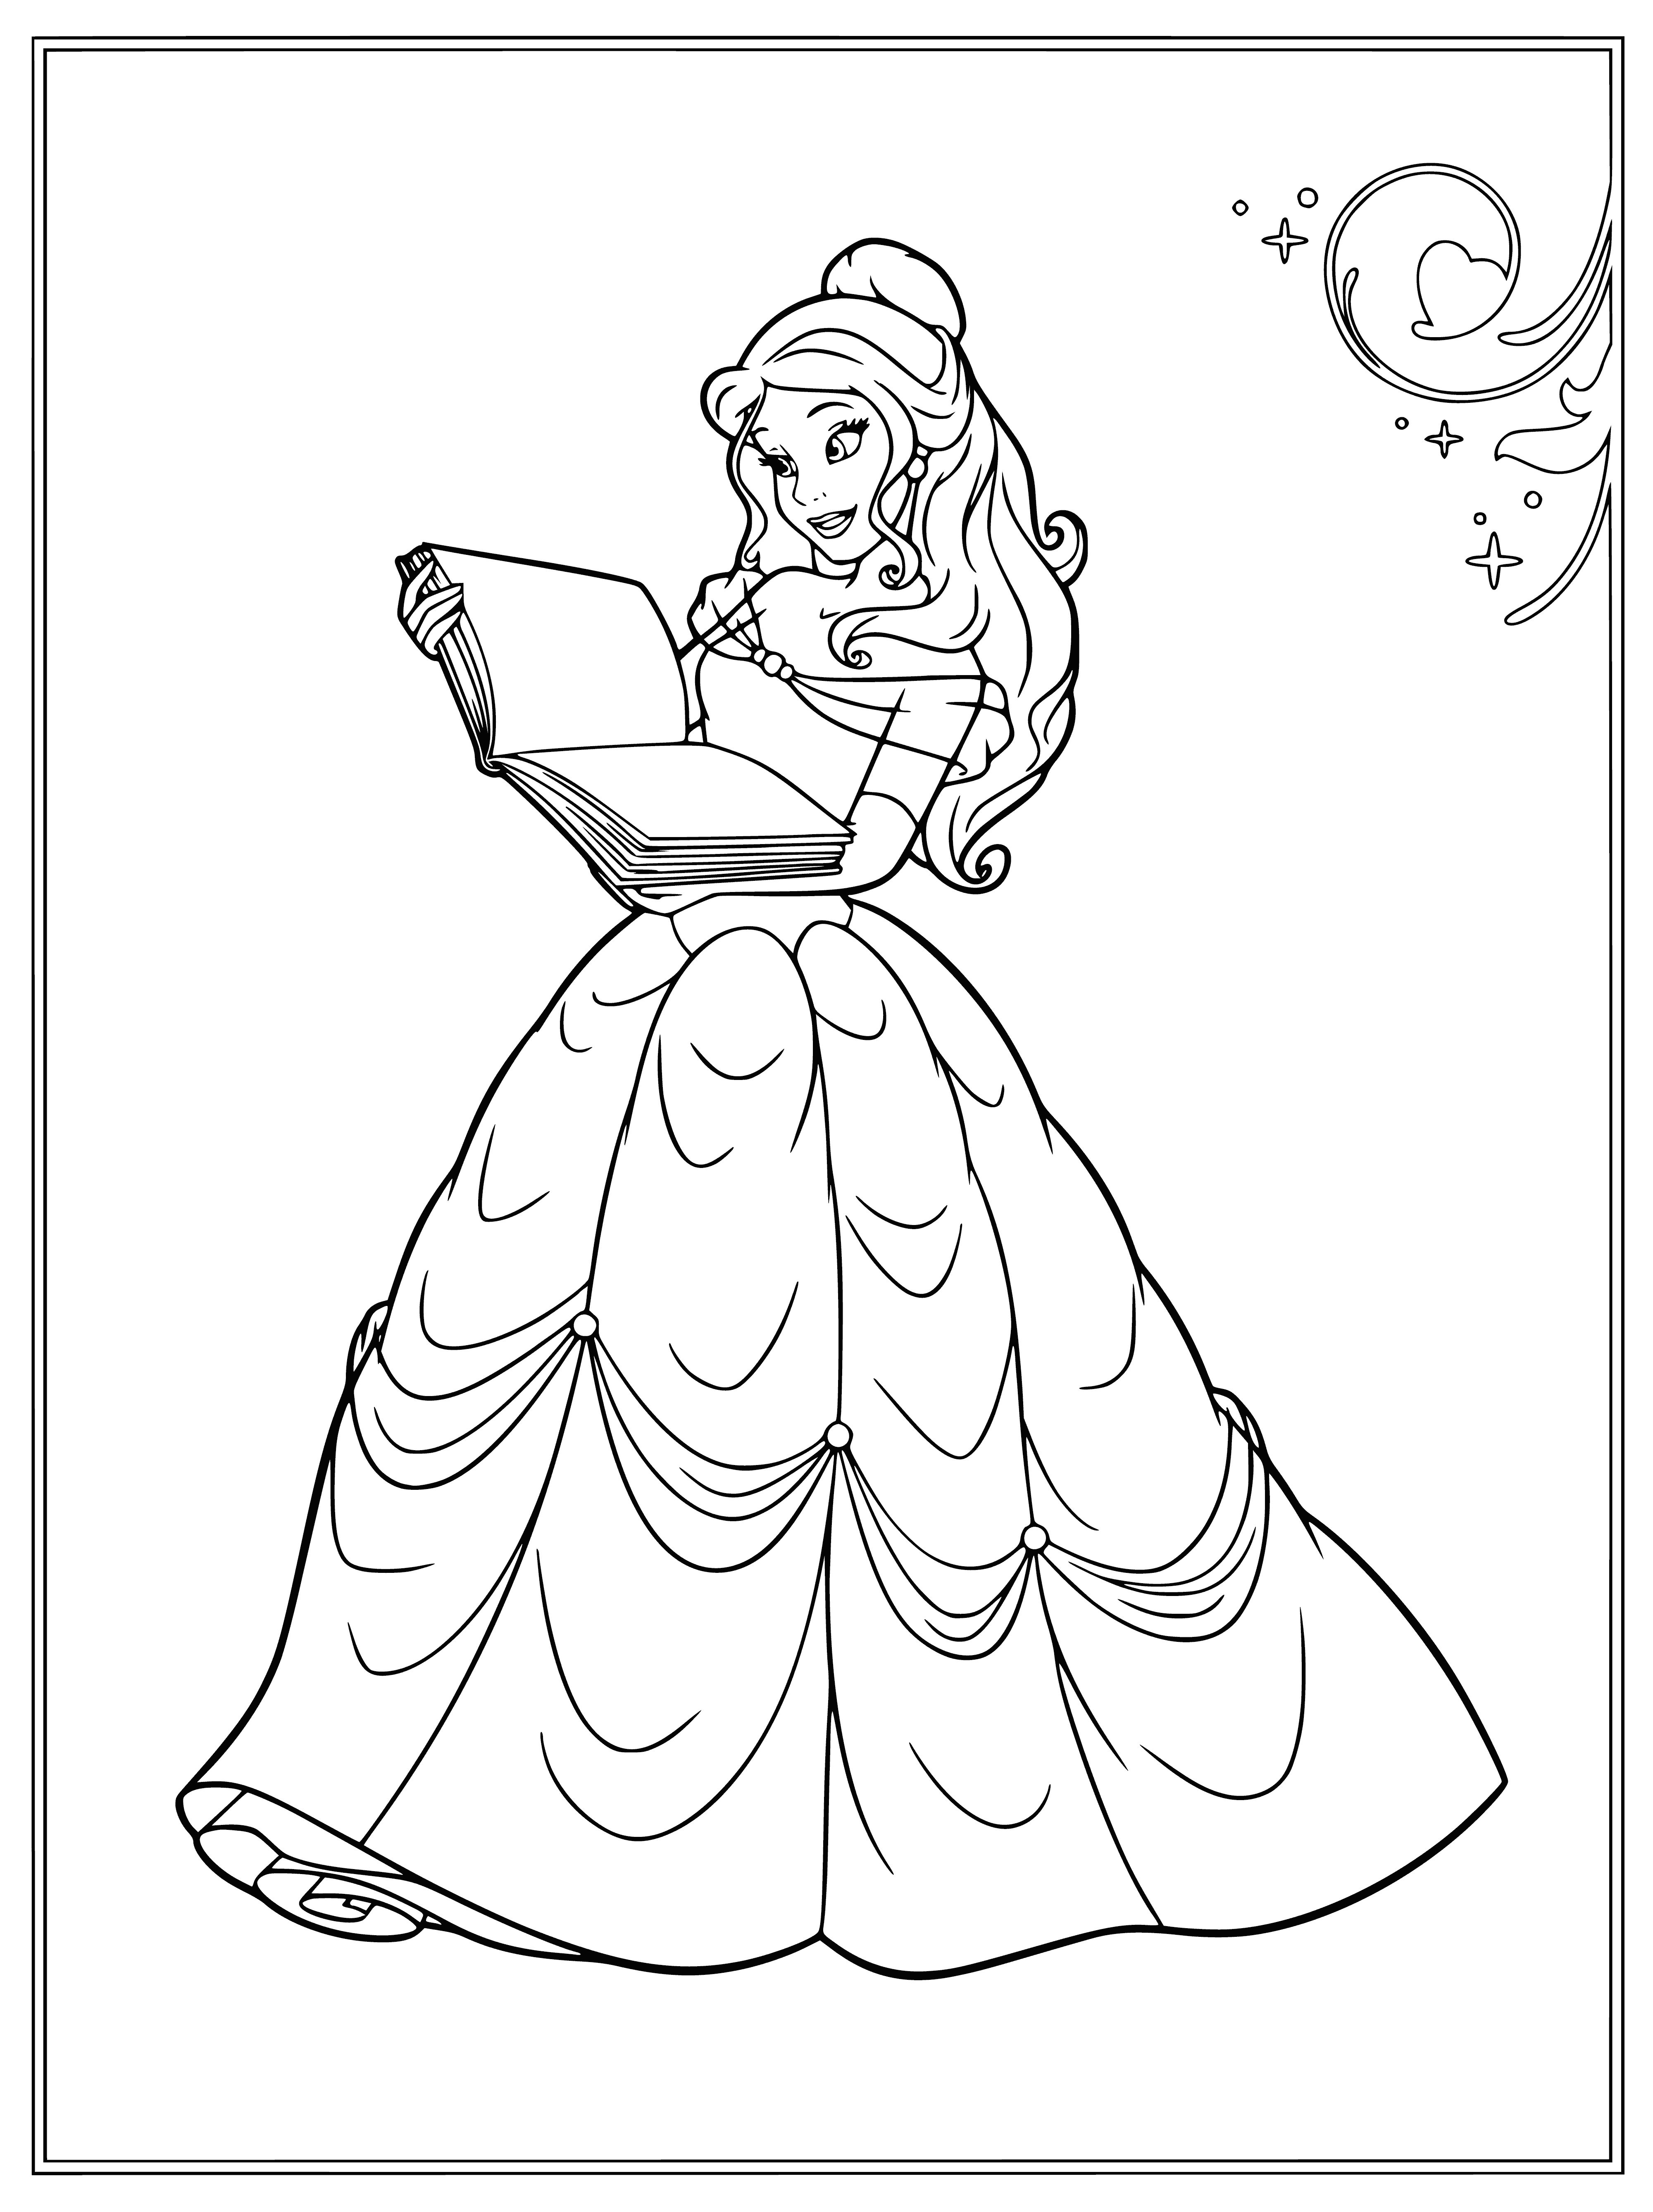 coloring page: Belle stands in a library-like room, holding a book and looking at it intently, with more books stacked on a table.